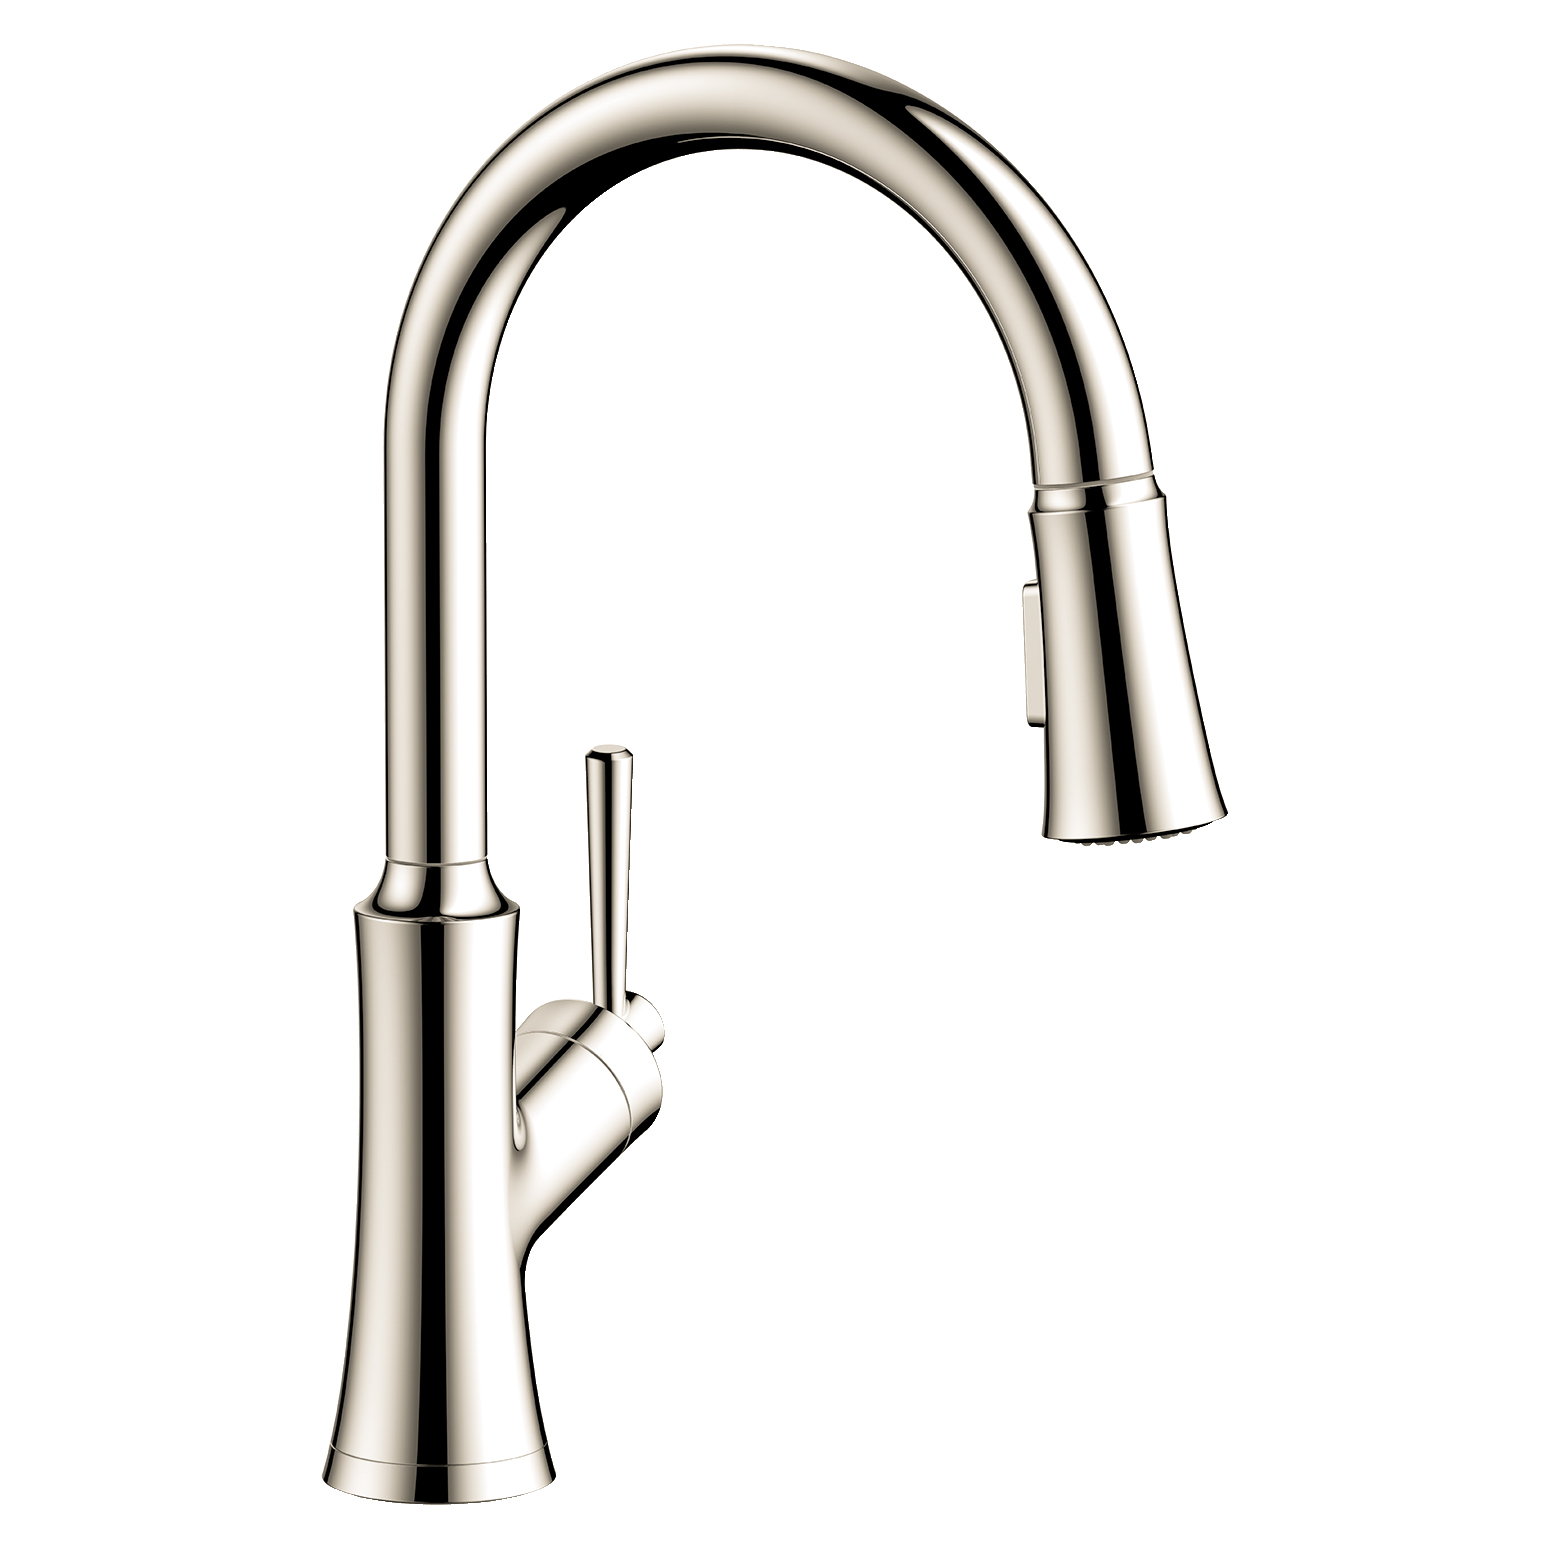 04793830 Hansgrohe Joleena HighArc Kitchen Faucet, 2-Spray Pull-Down, 1.75 gpm, Polished Nickel